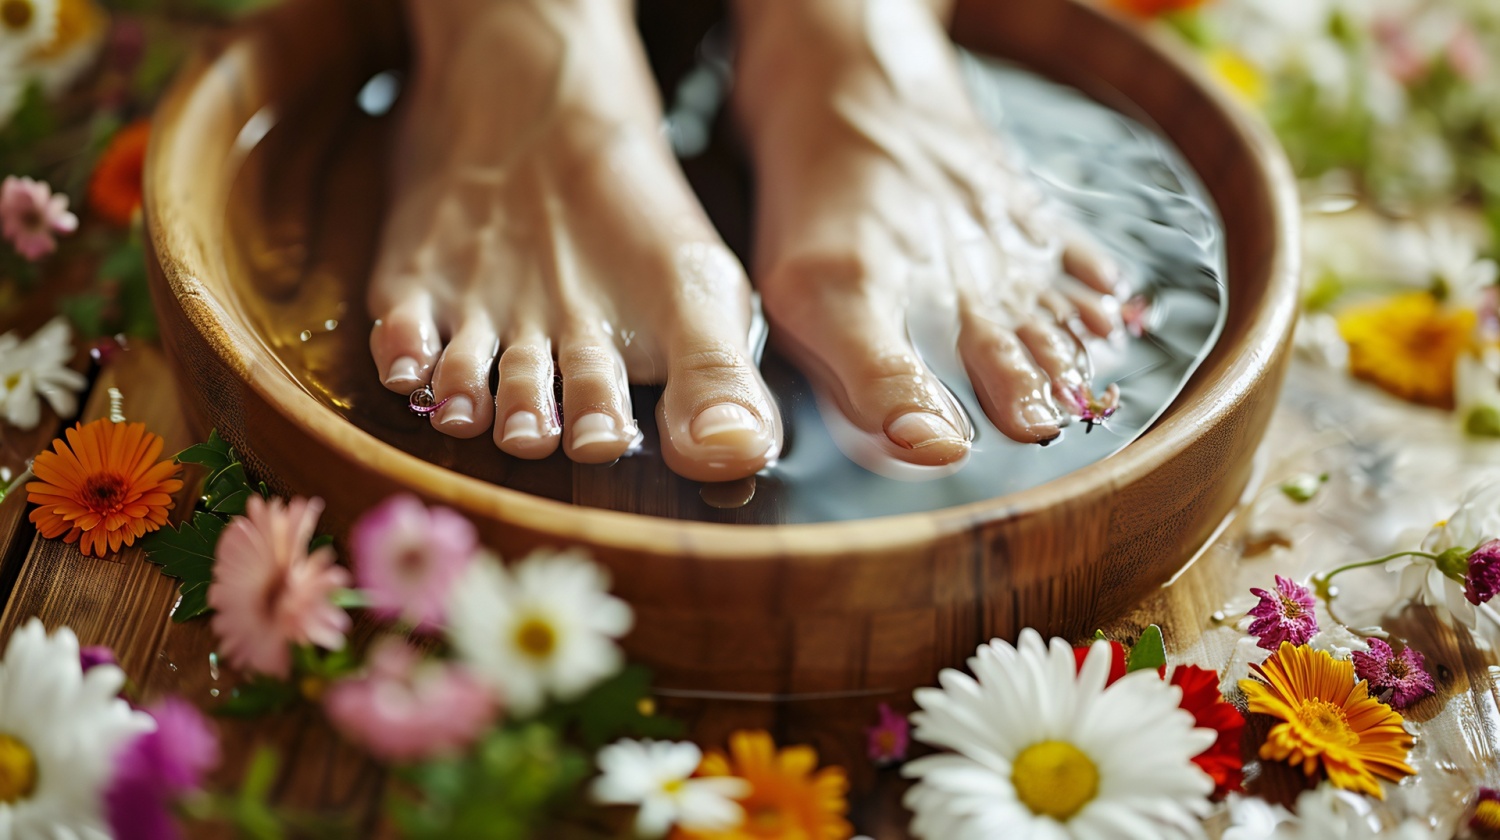 Foot Soak for Men With Tired Feet